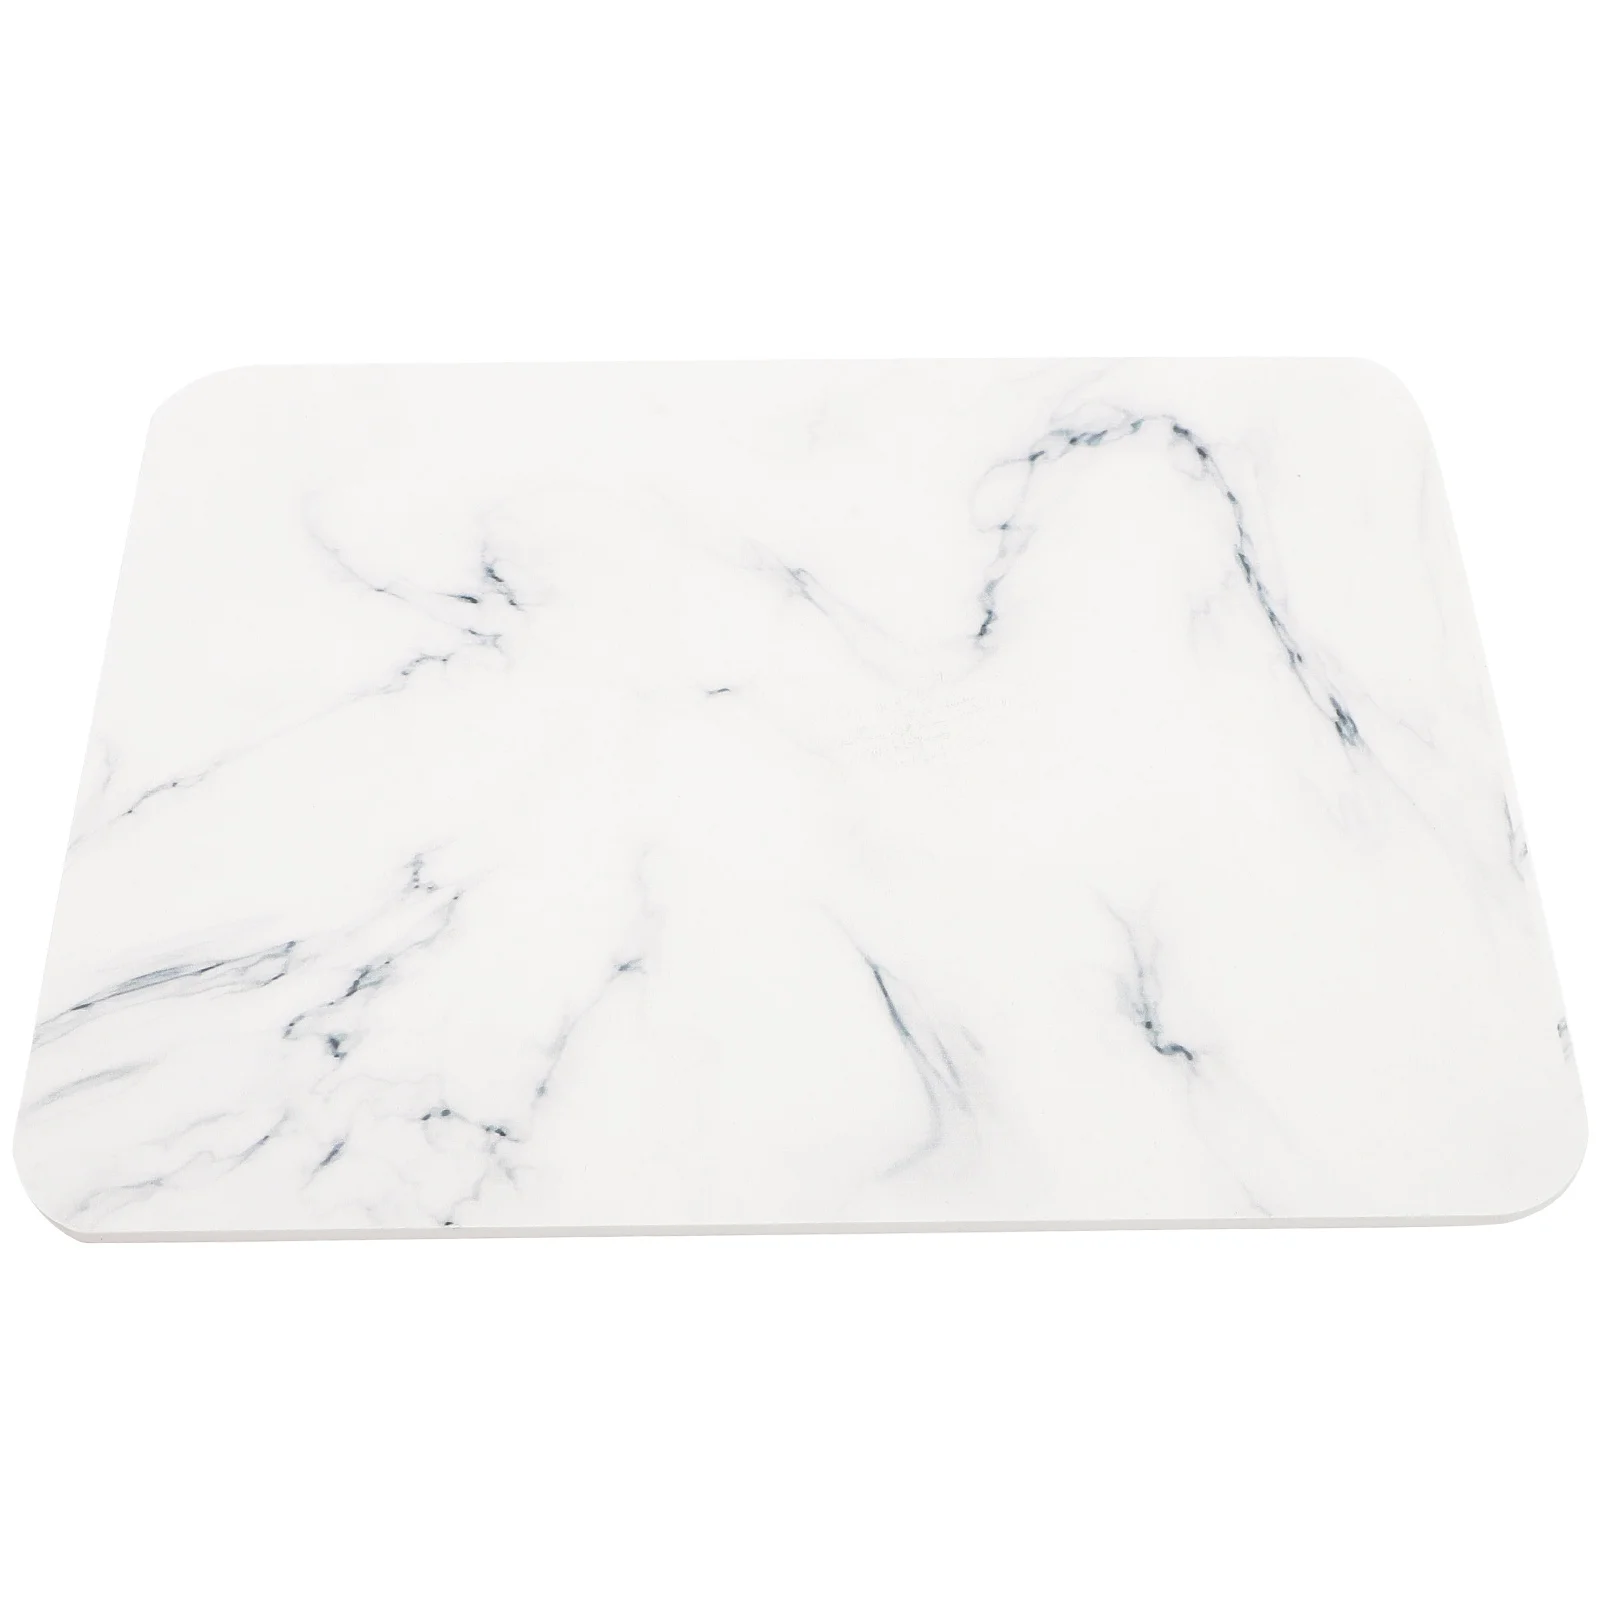 

Dish Mat Bathroom Dishwashing Diatomite Quick-drying Pad Absorbent Heat-resistant 12 Inches X 16 (marble (40*30) Large Size)